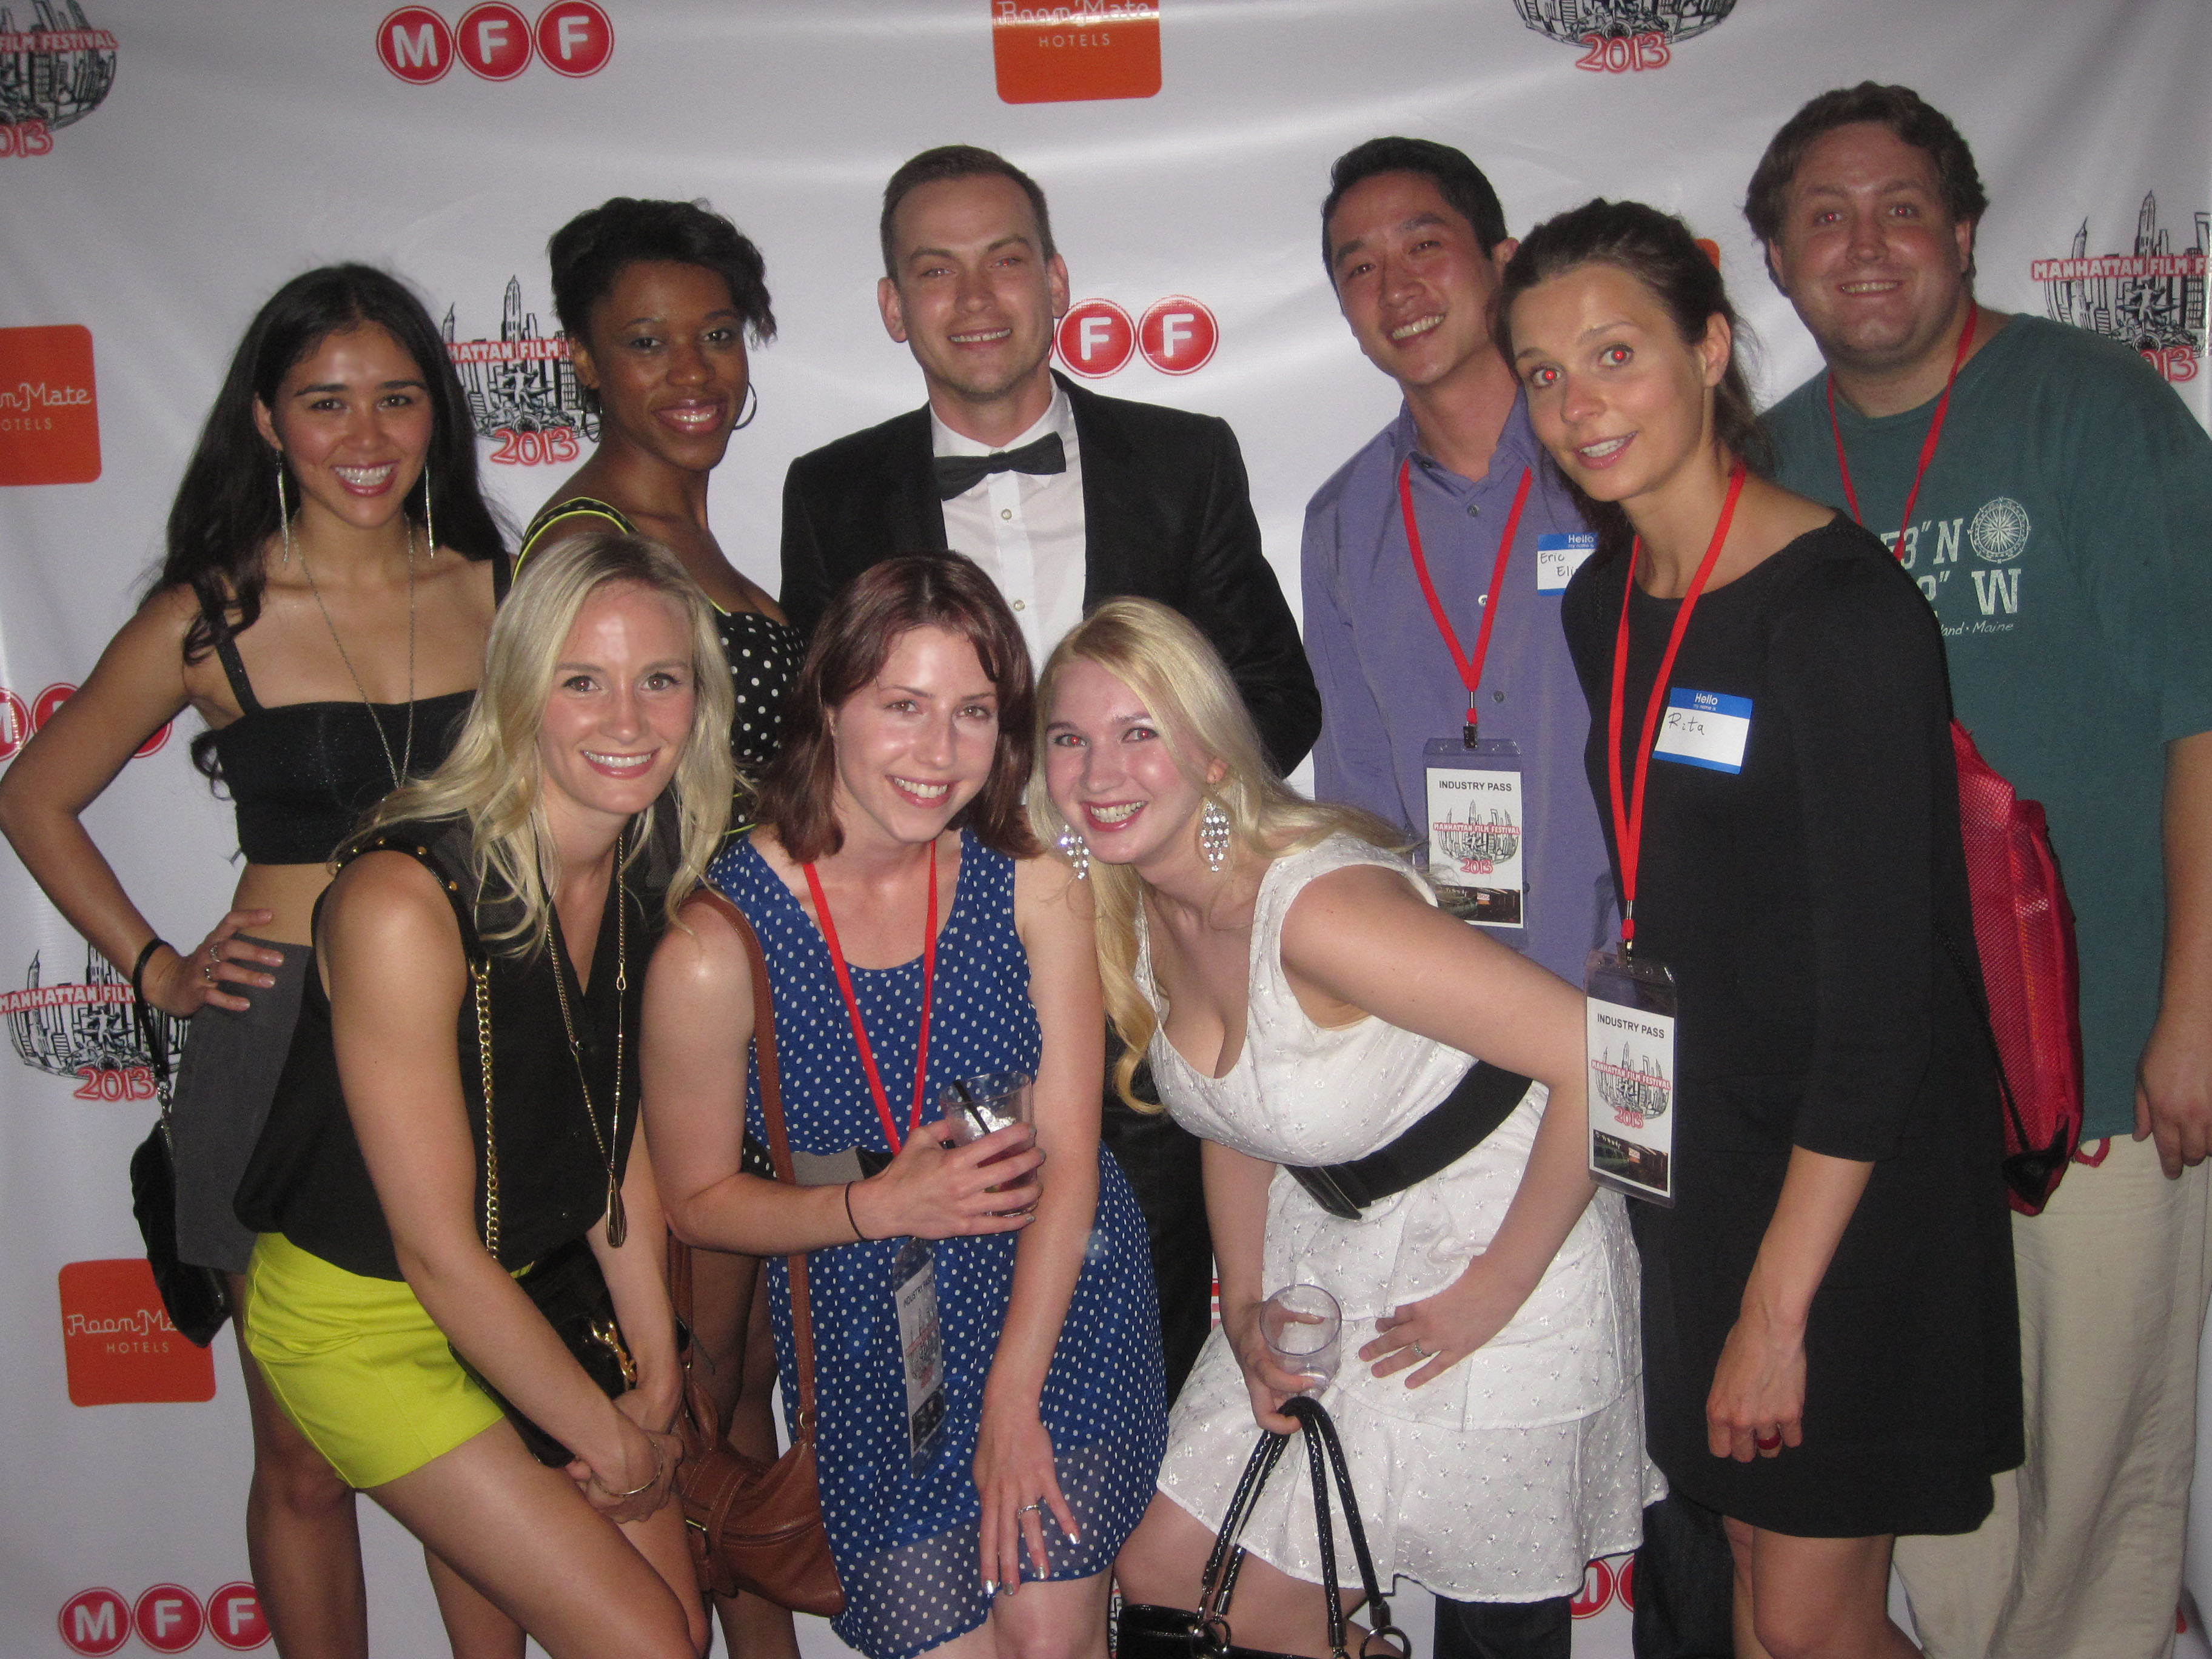 Cast and crew of The Spaceship at the Manhattan Film Festival, NYC 2013